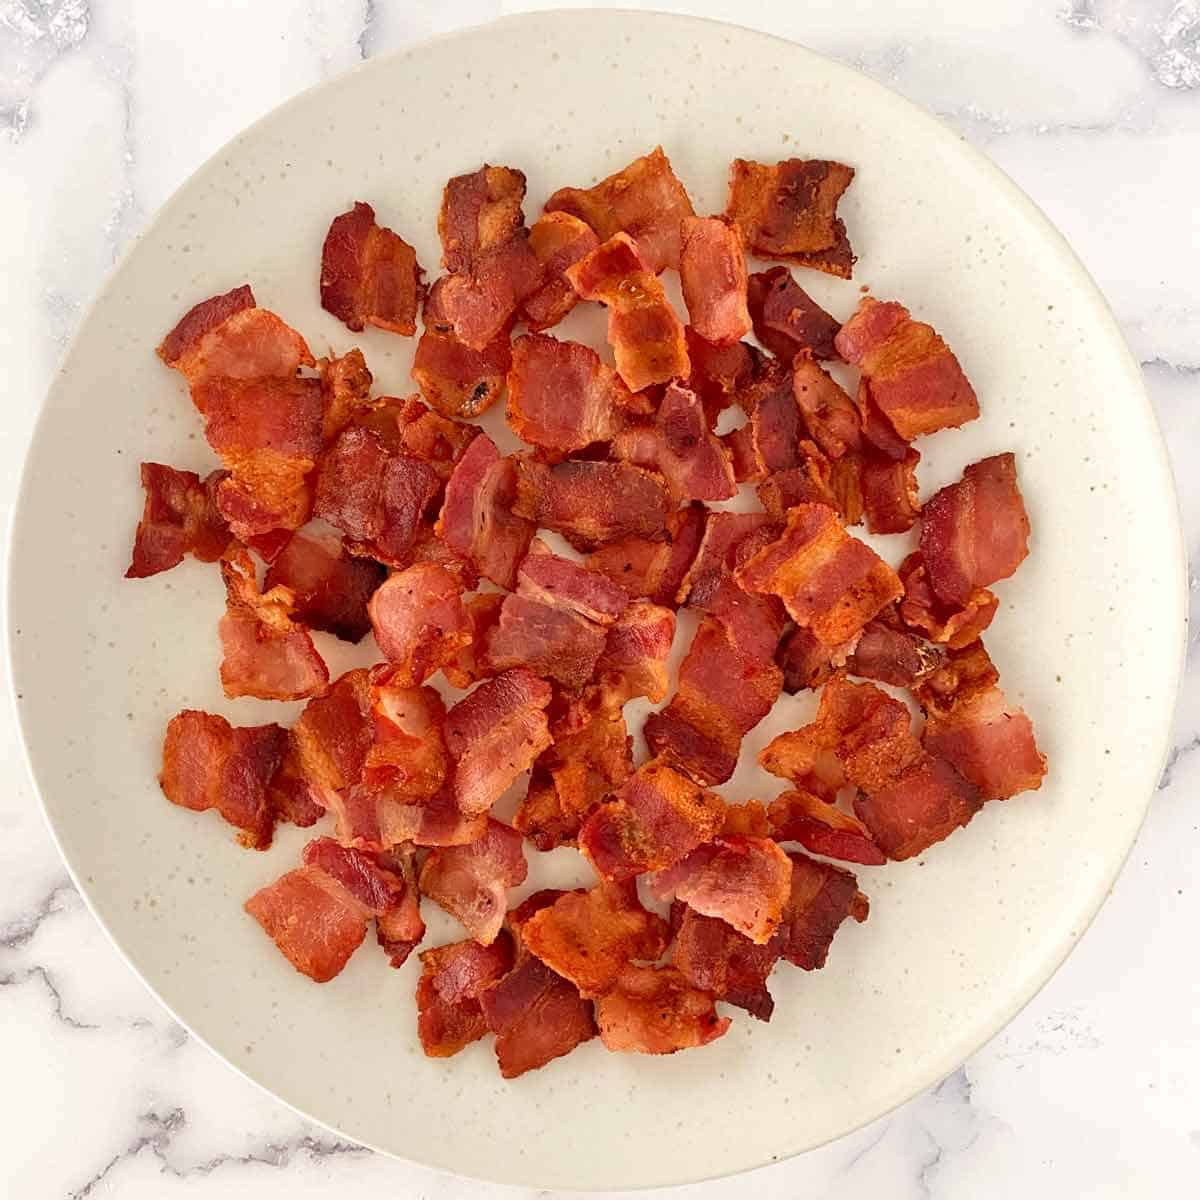 Golden brown chopped cooked bacon on a white plate.